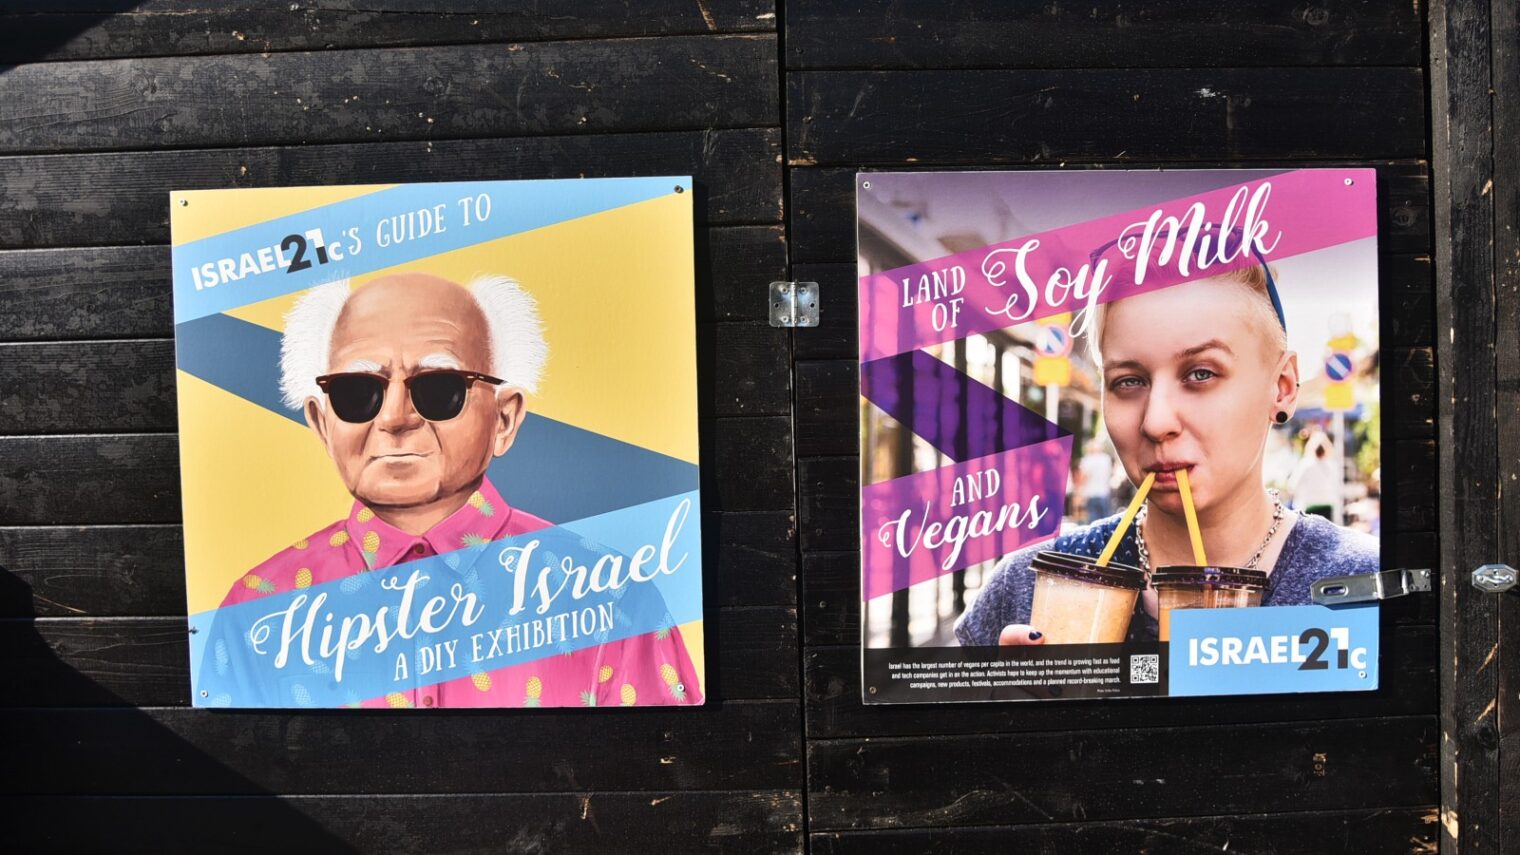 Posters from ISRAEL21c’s “The Guide to Hipster Israel” displayed at Food Planet 2020 in Novi Sad, Serbia. Photo by Mladen Sekulic